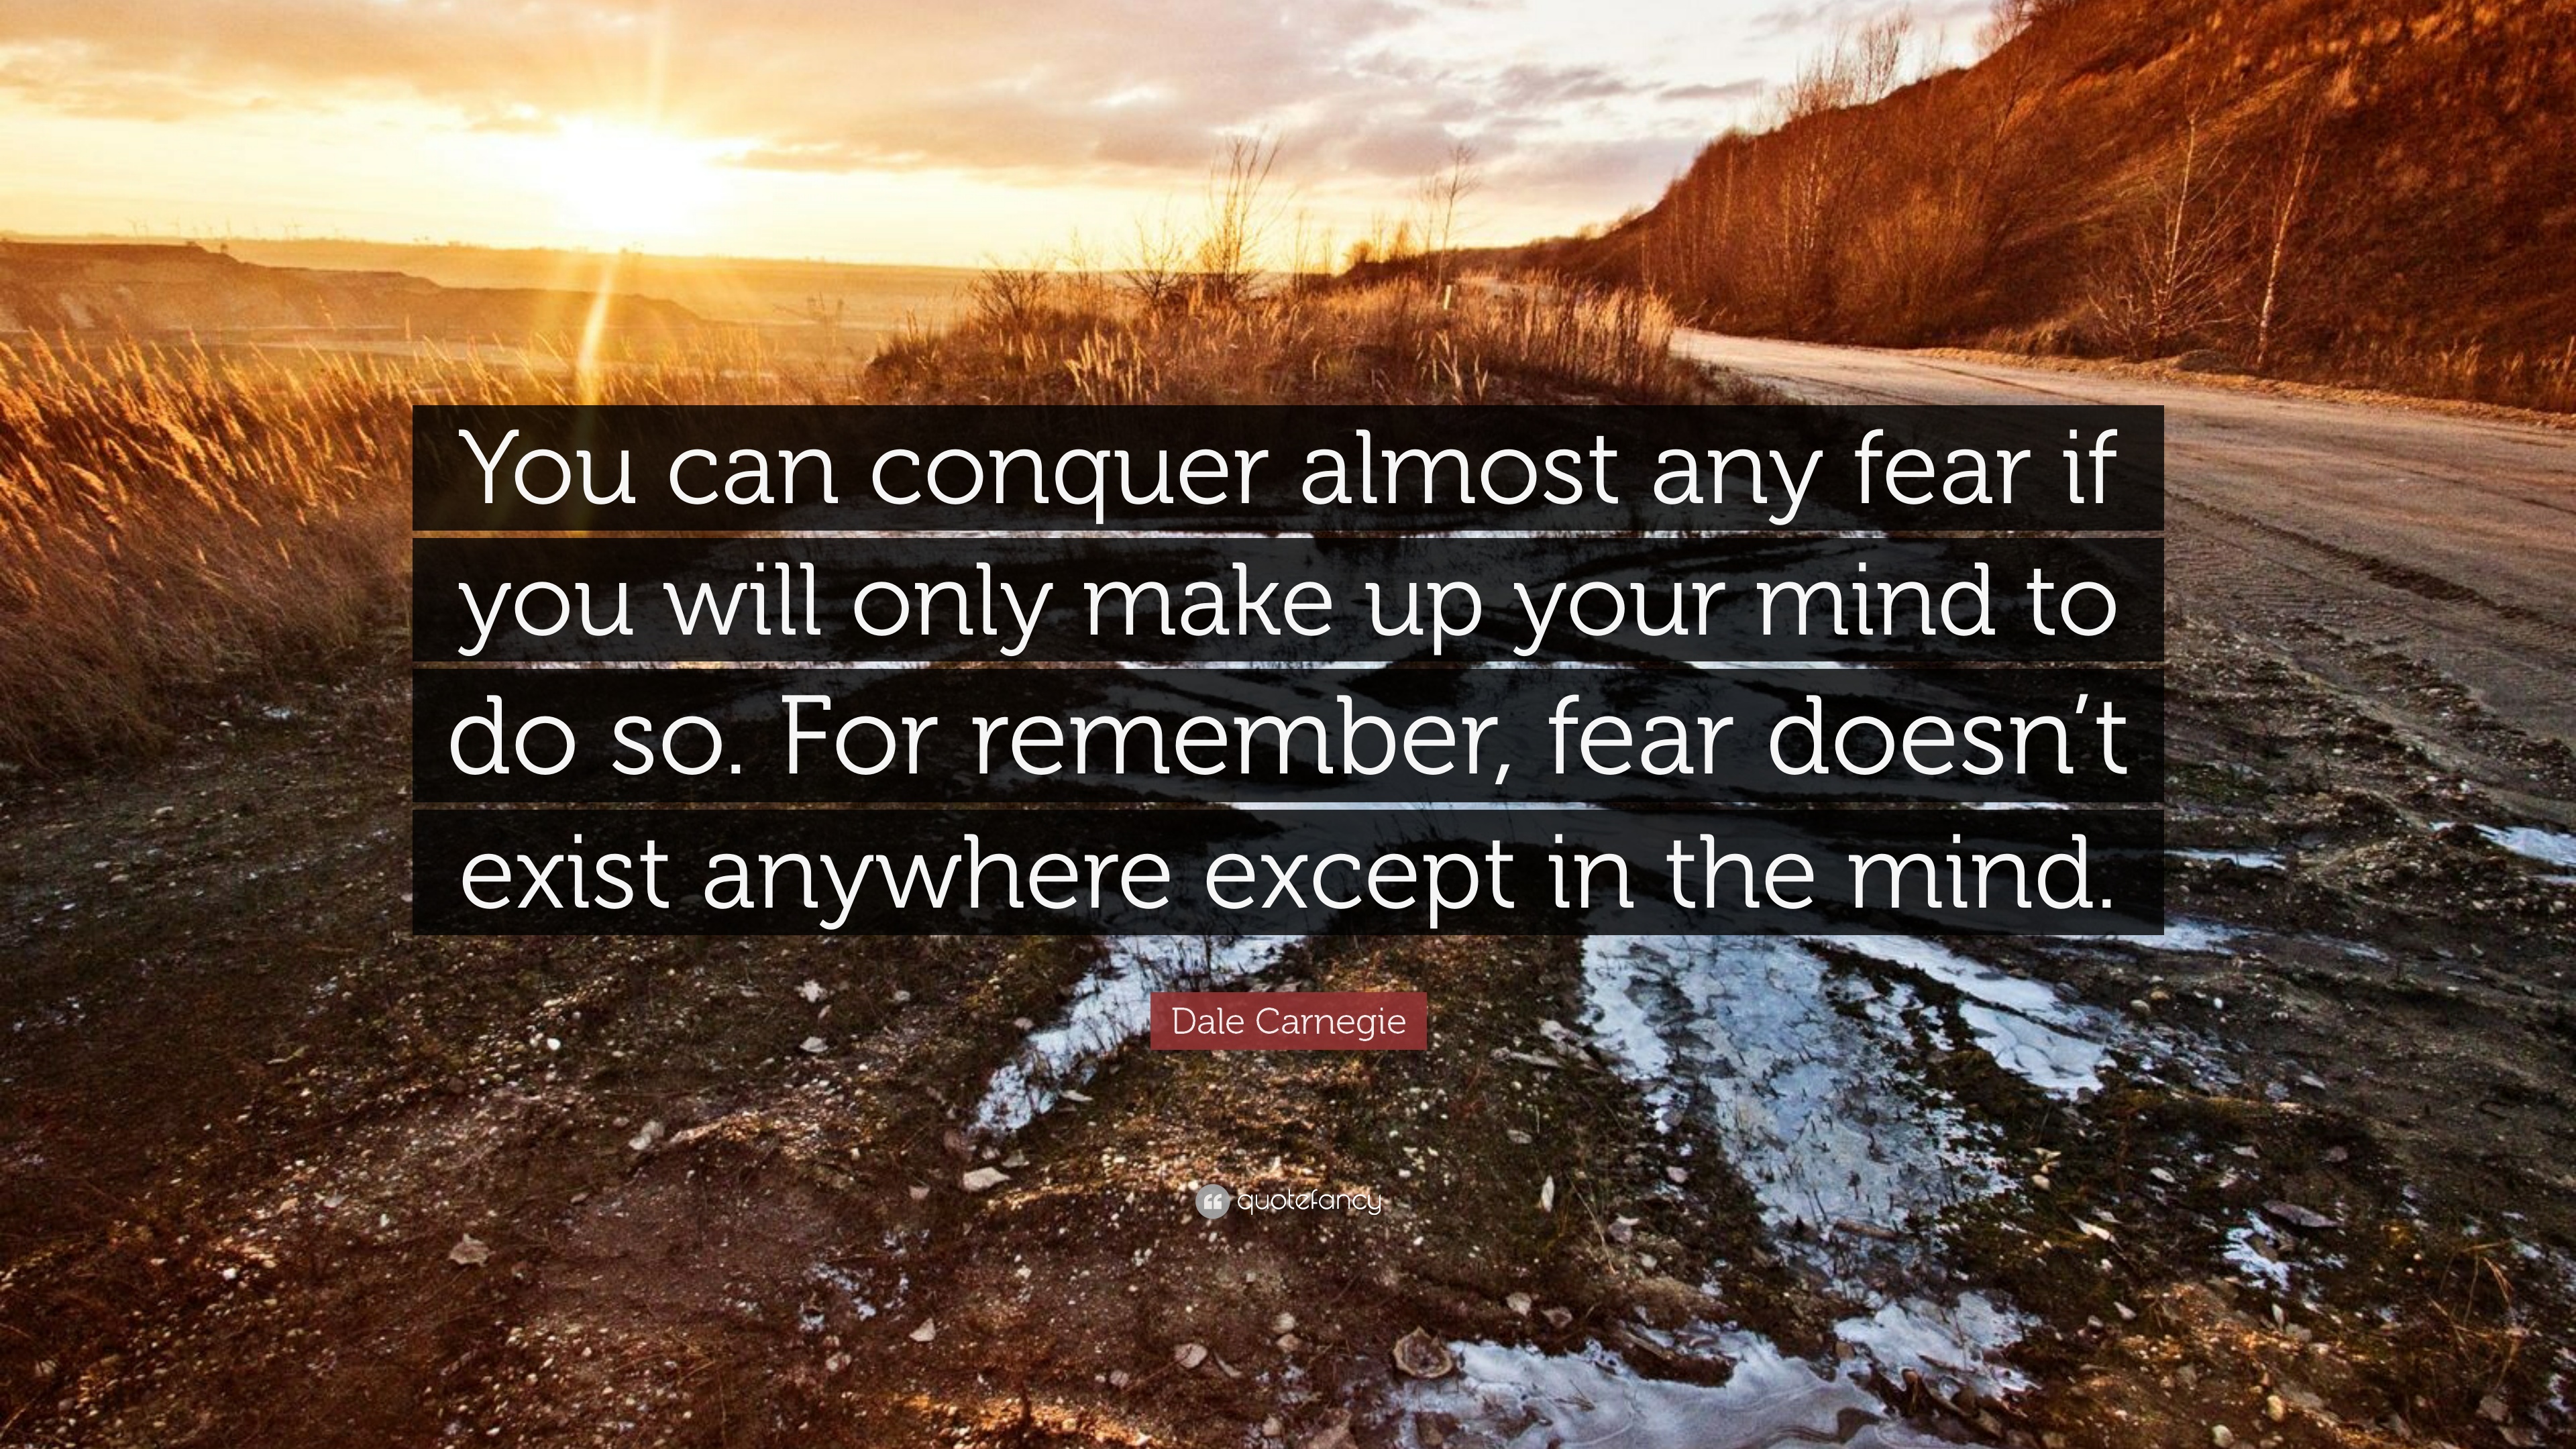 You can conquer almost any fear if you will only make up your mind to do so.  For remember, fear doesn’t exist anywhere but in the mind.